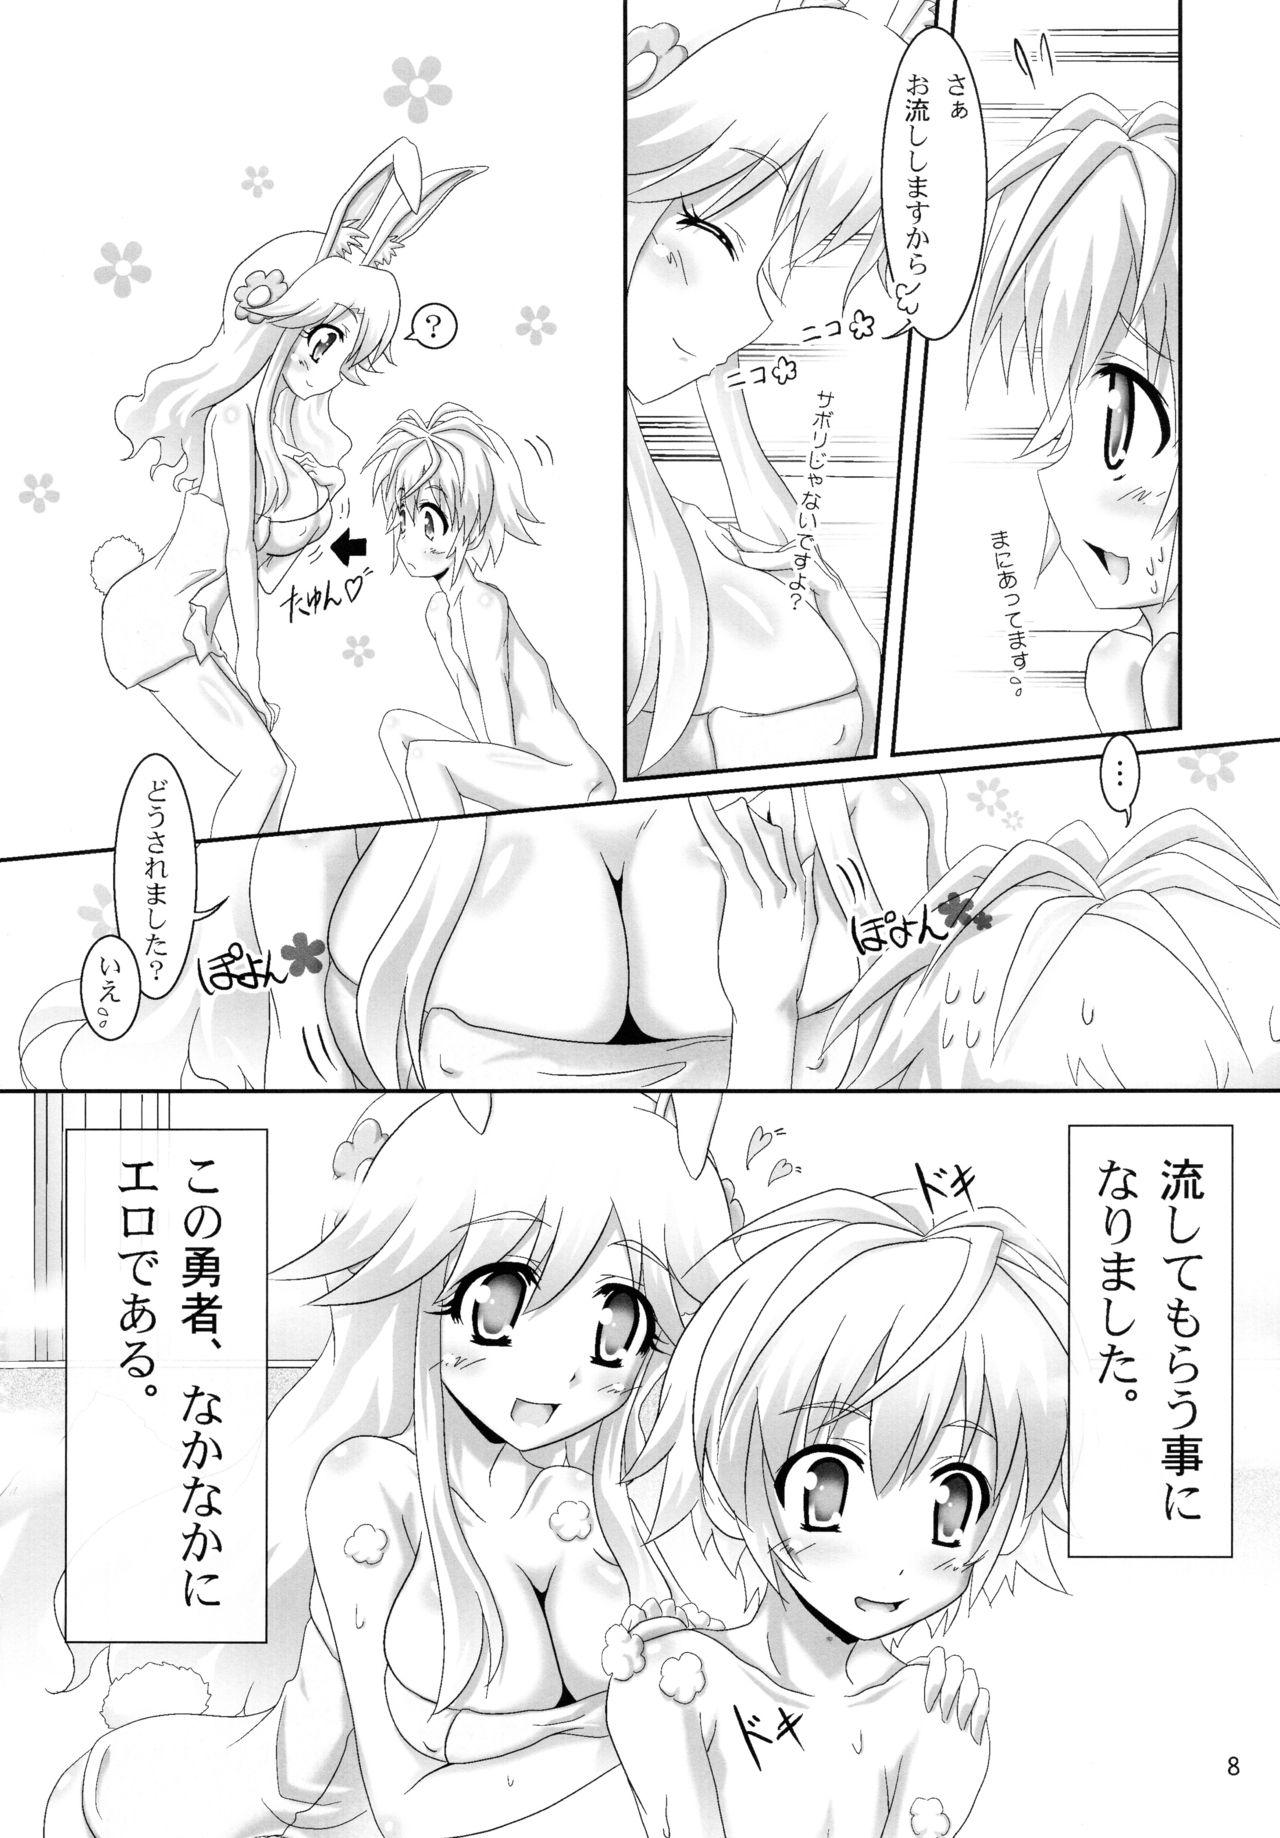 Boobs Ofuro DAYS - Dog days Licking Pussy - Page 8